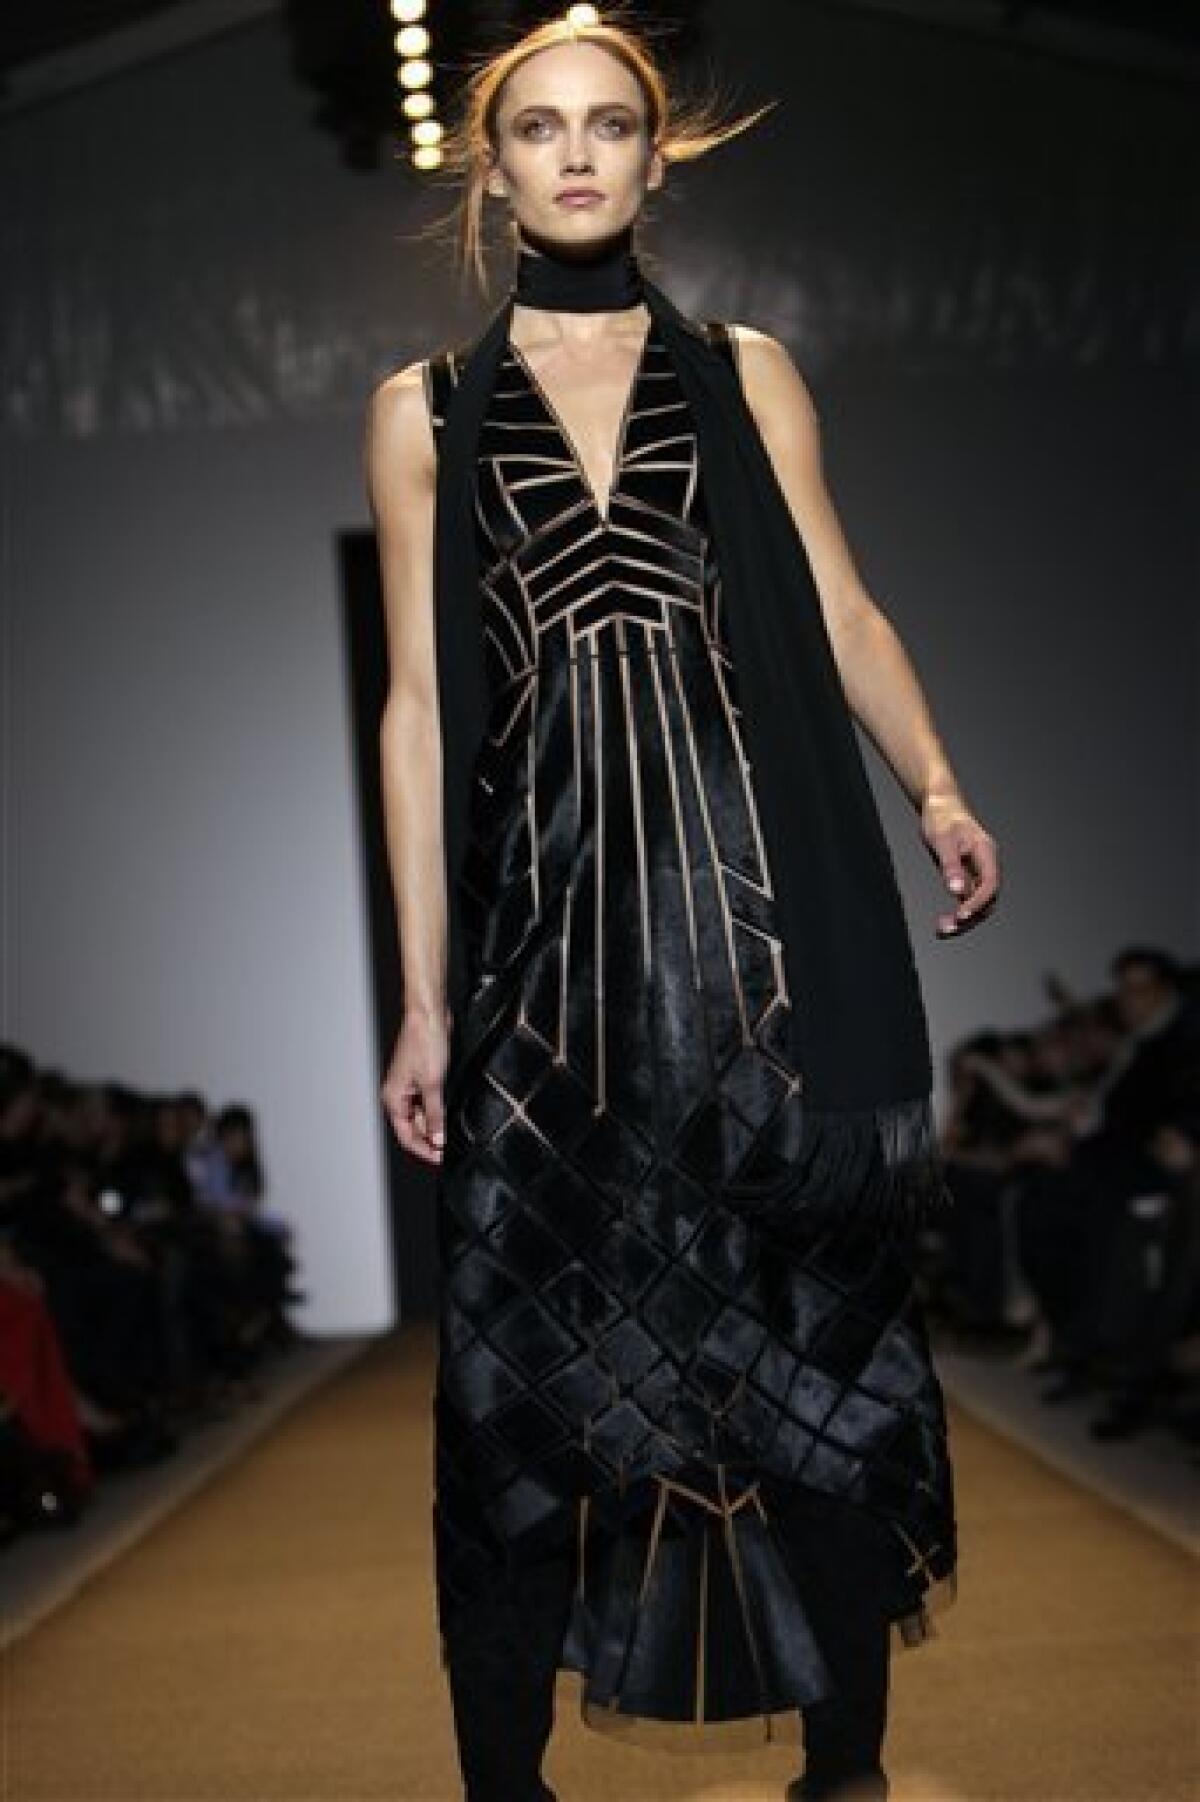 Fall 2011 fashion from J. Mendel is modeled during Fashion Week in New York, Tuesday, Feb. 15, 2011. (AP Photo/Seth Wenig)